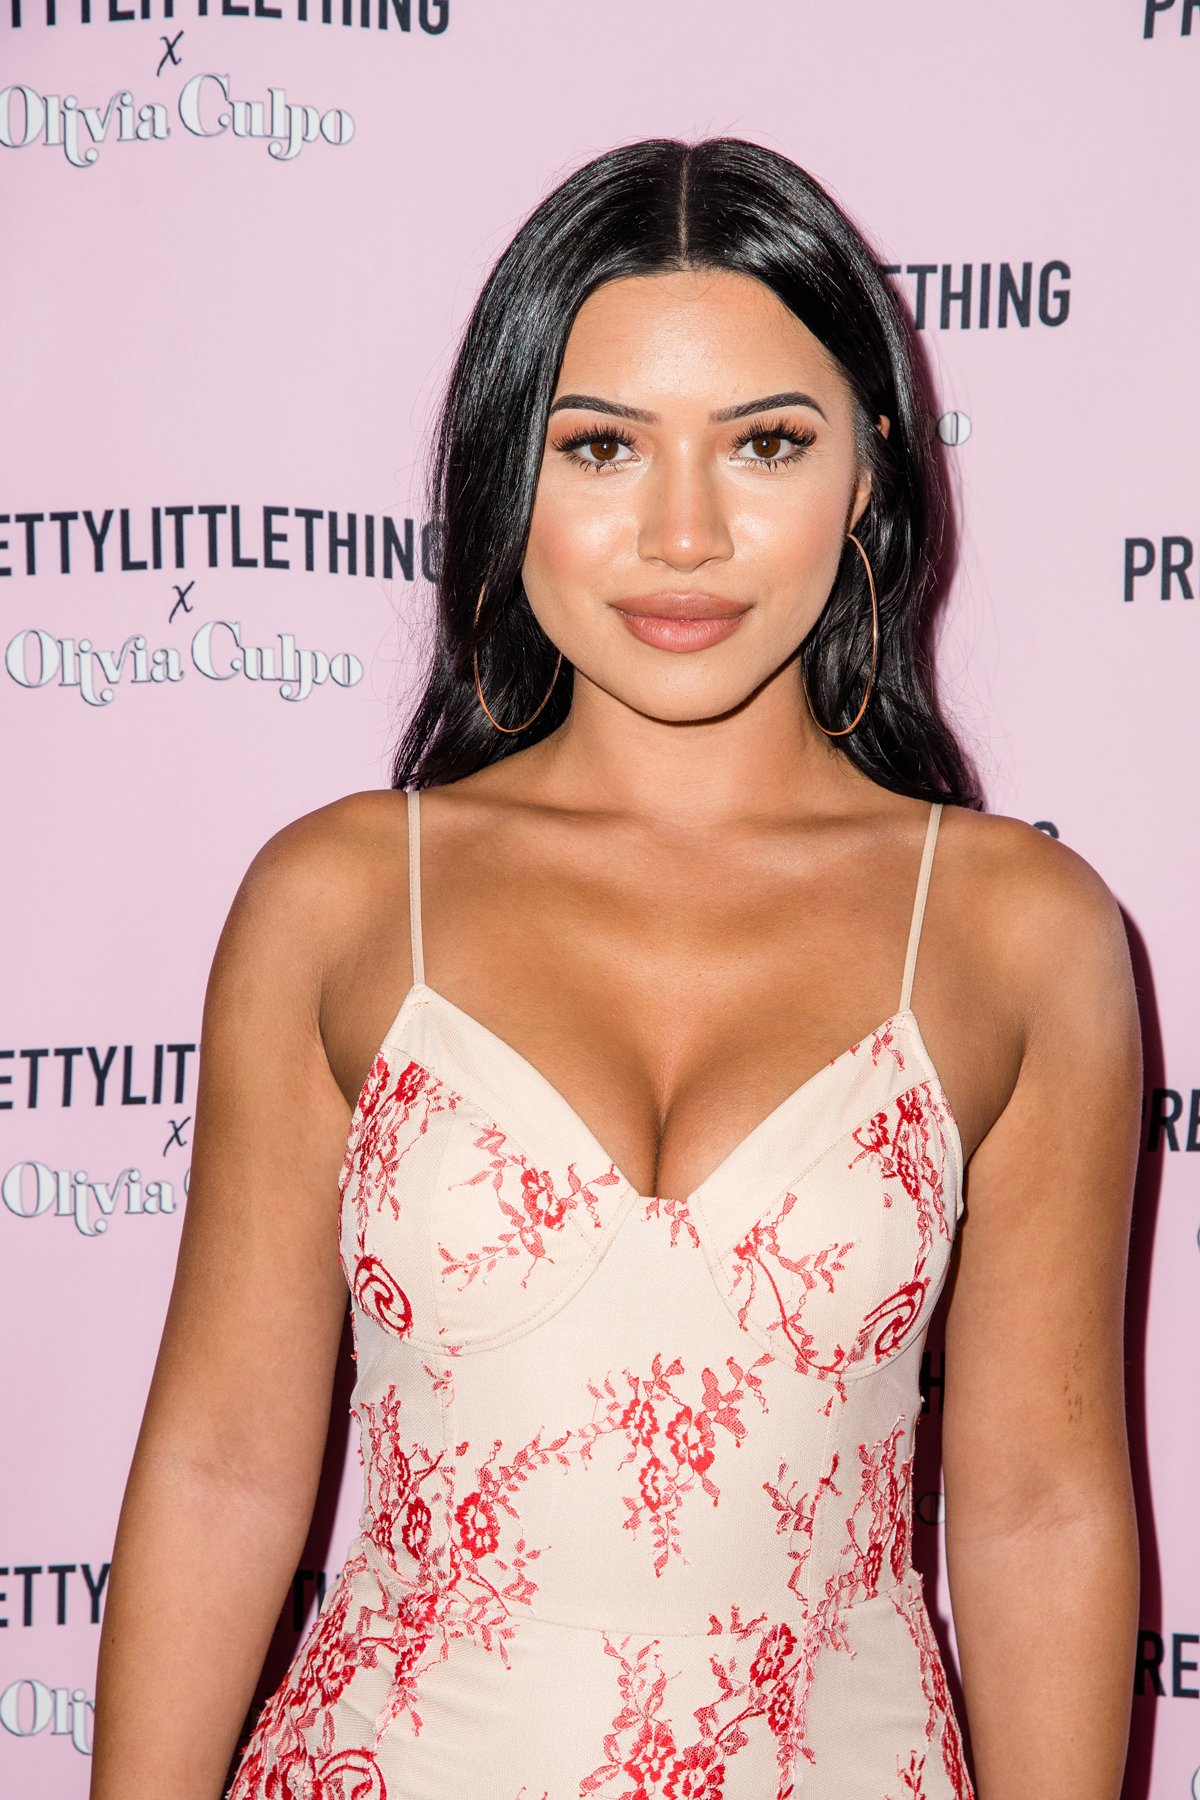 PrettyLittleThing PLT X Olivia Culpo Collection  Celebrity Launch Party Julia Kelly.jpg